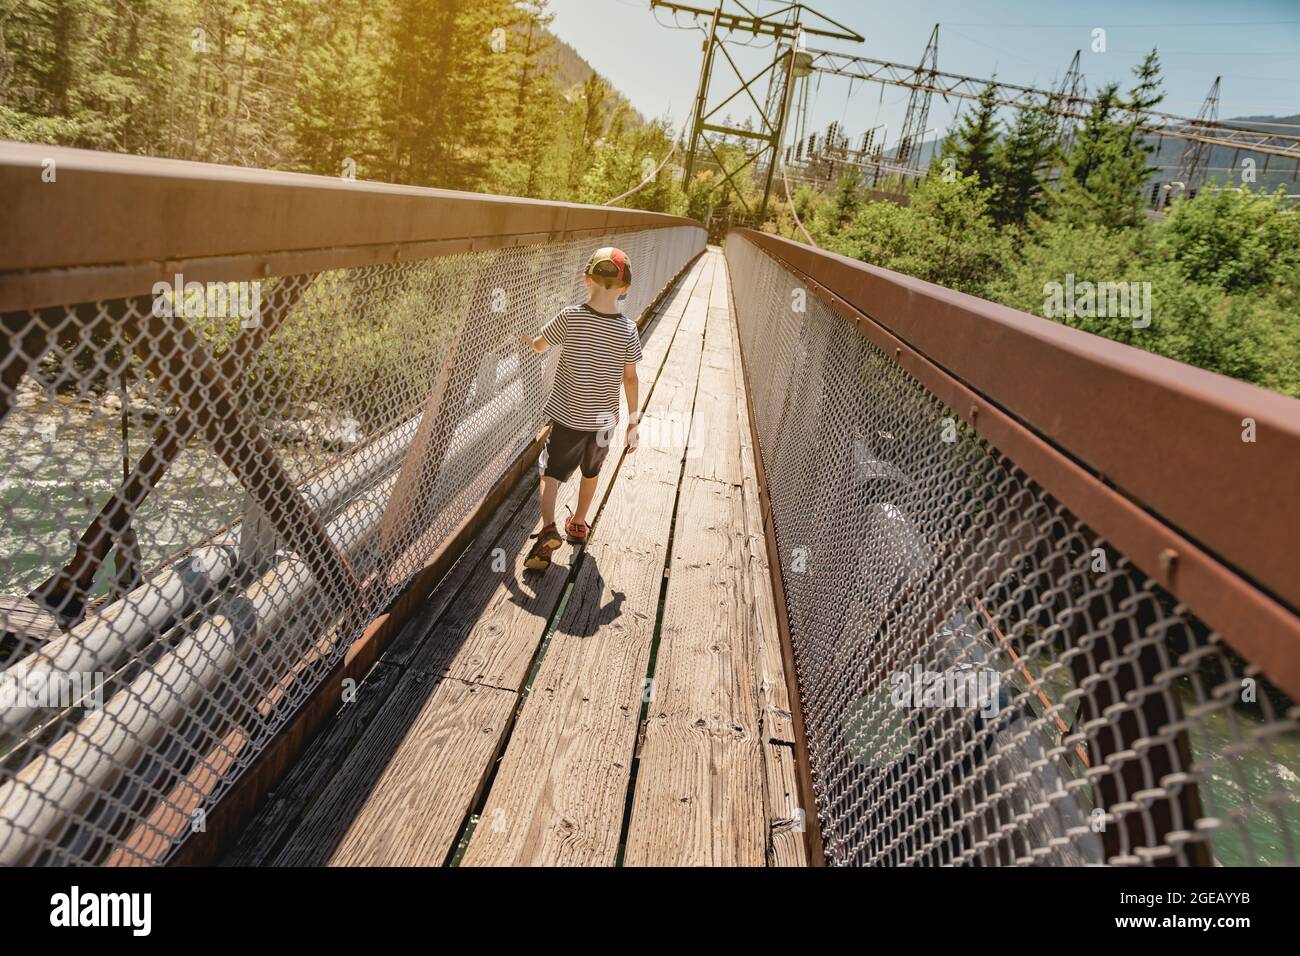 Young boy walking across a suspension bridge spanning the Skagit river in North Cascades National Park. Stock Photo